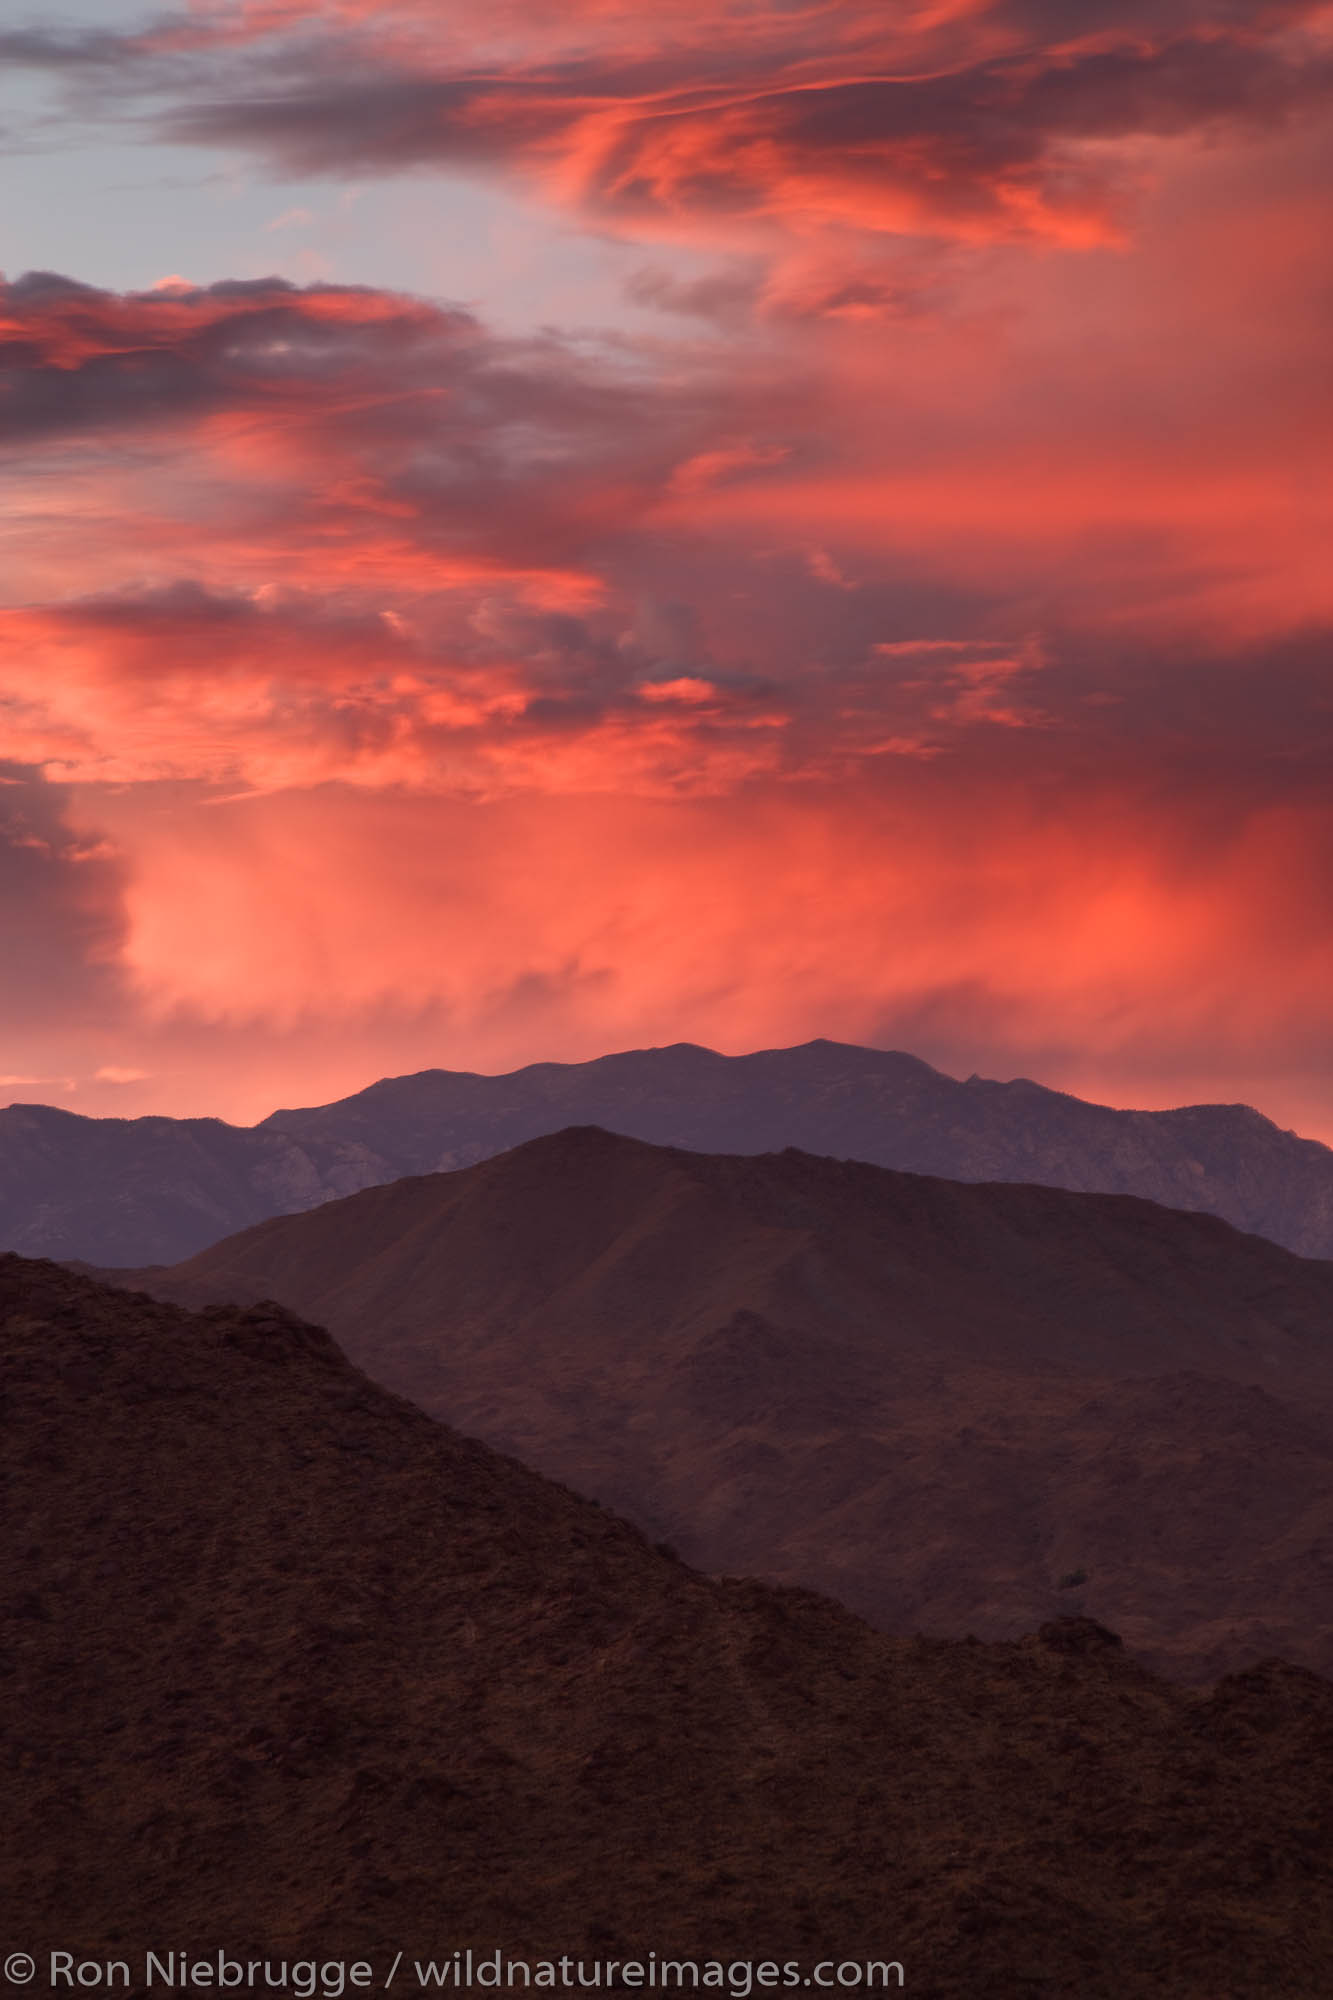 Sunset over the San Jacinto Mountains from Palm Desert and the Coachella Valley, California.